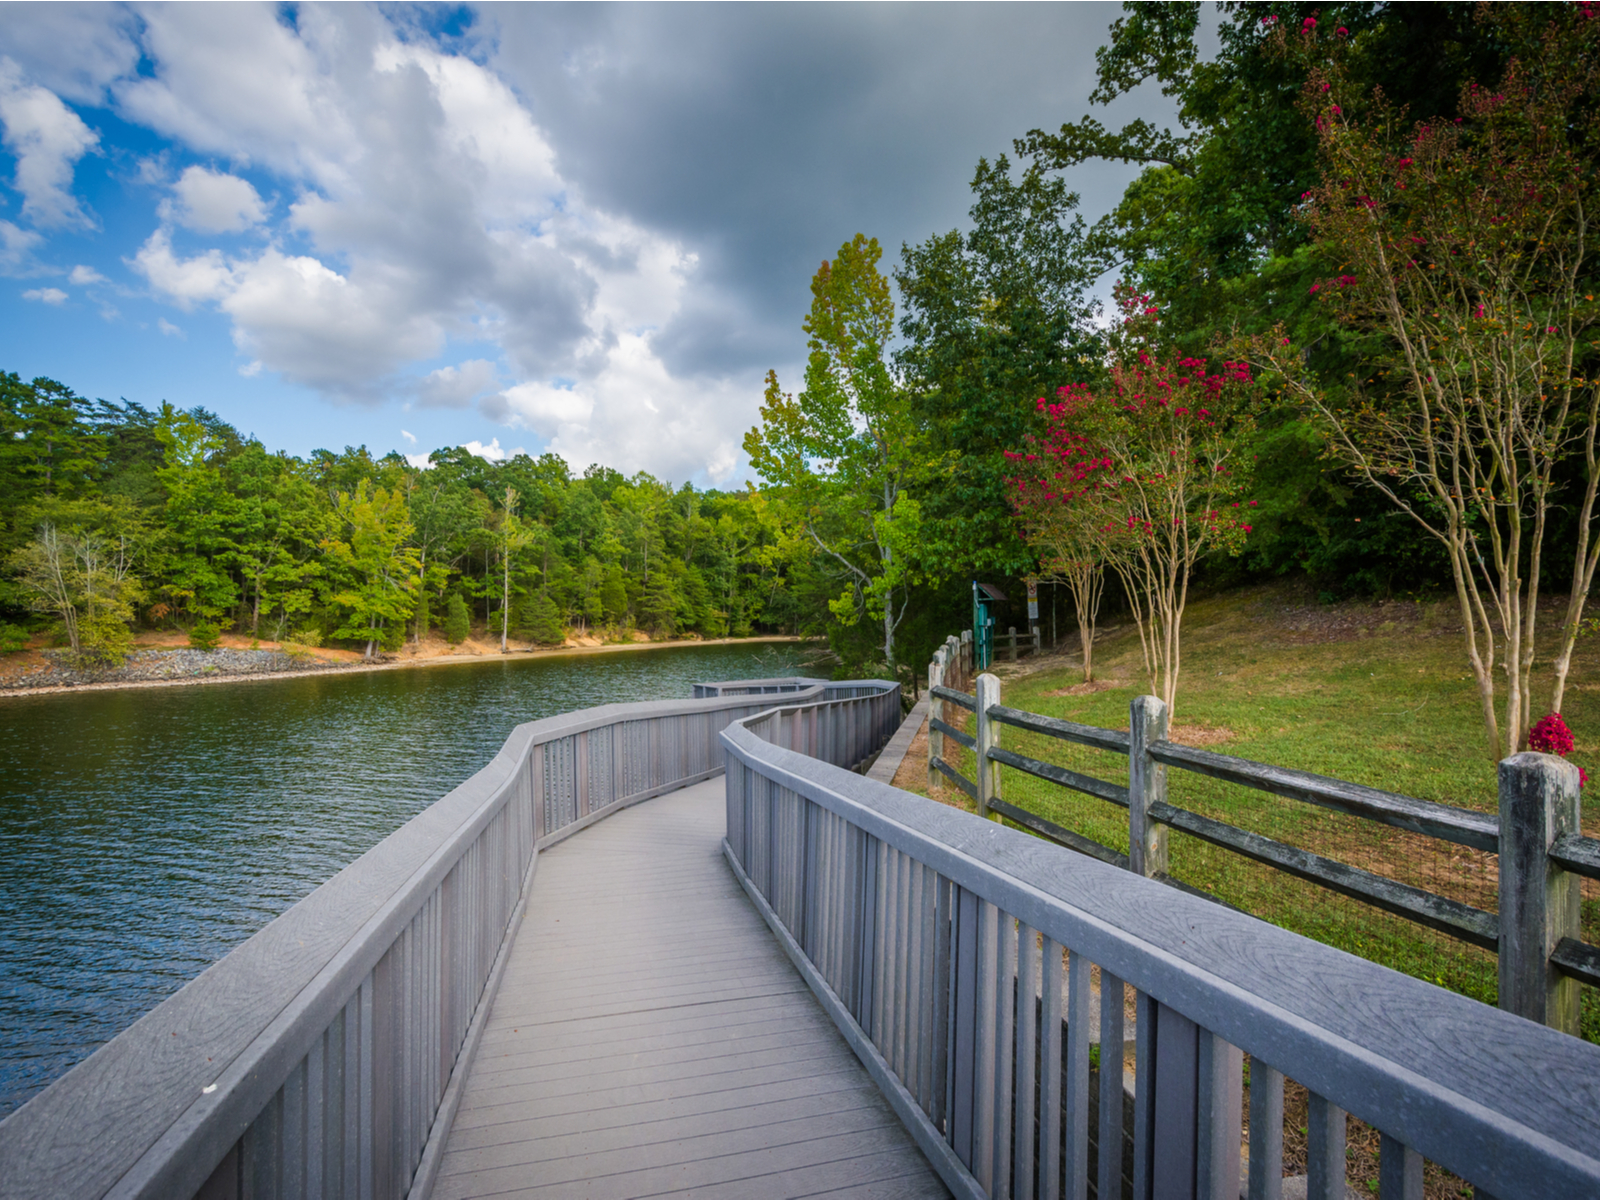 a wooden board walk beside a calm lake and trees in a cloudy day at mcdowell nature center and preserve, one of the best things to do in charlotte, nc